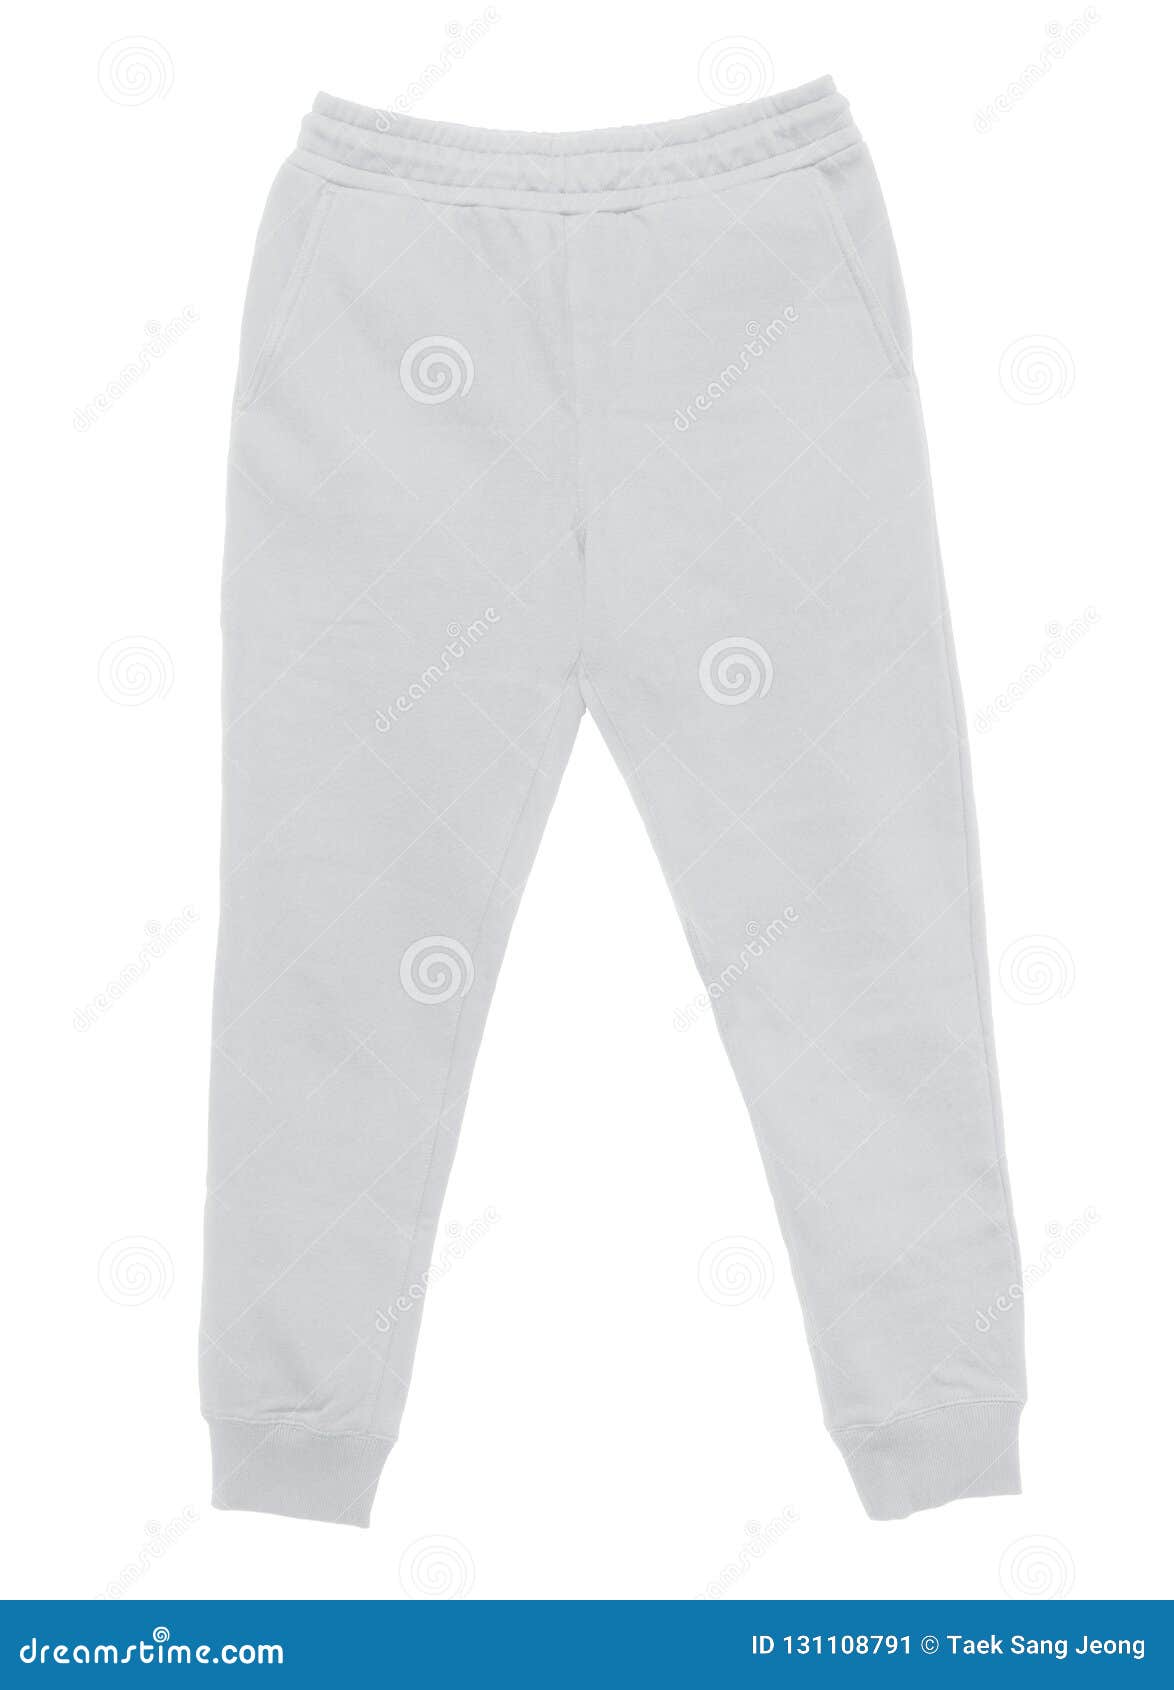 Blank Training Jogger Pants Color White Front View Stock Image - Image ...